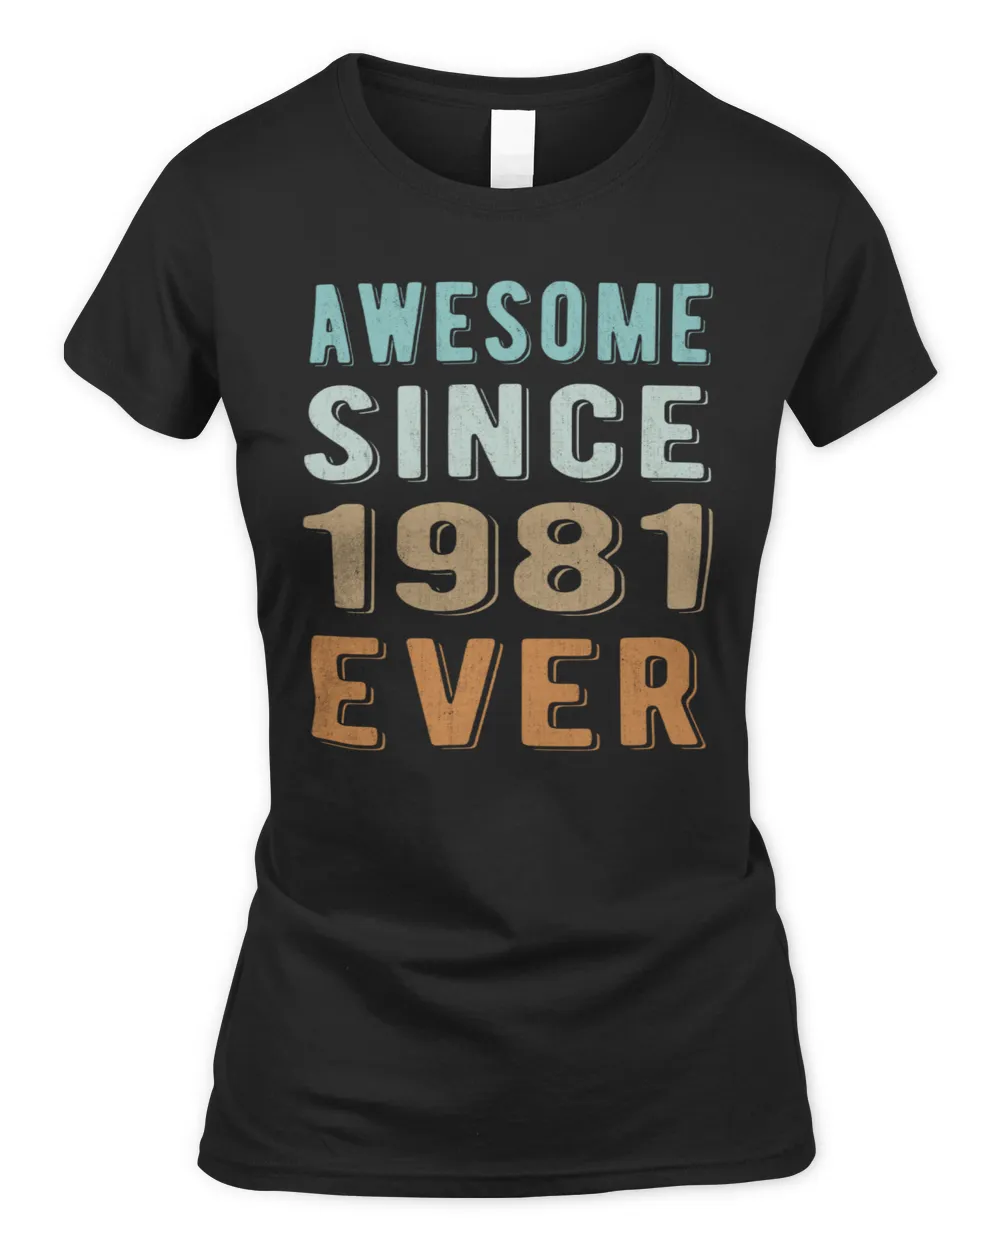 Awesome since 1981 ever Retro style 40th birthday gift